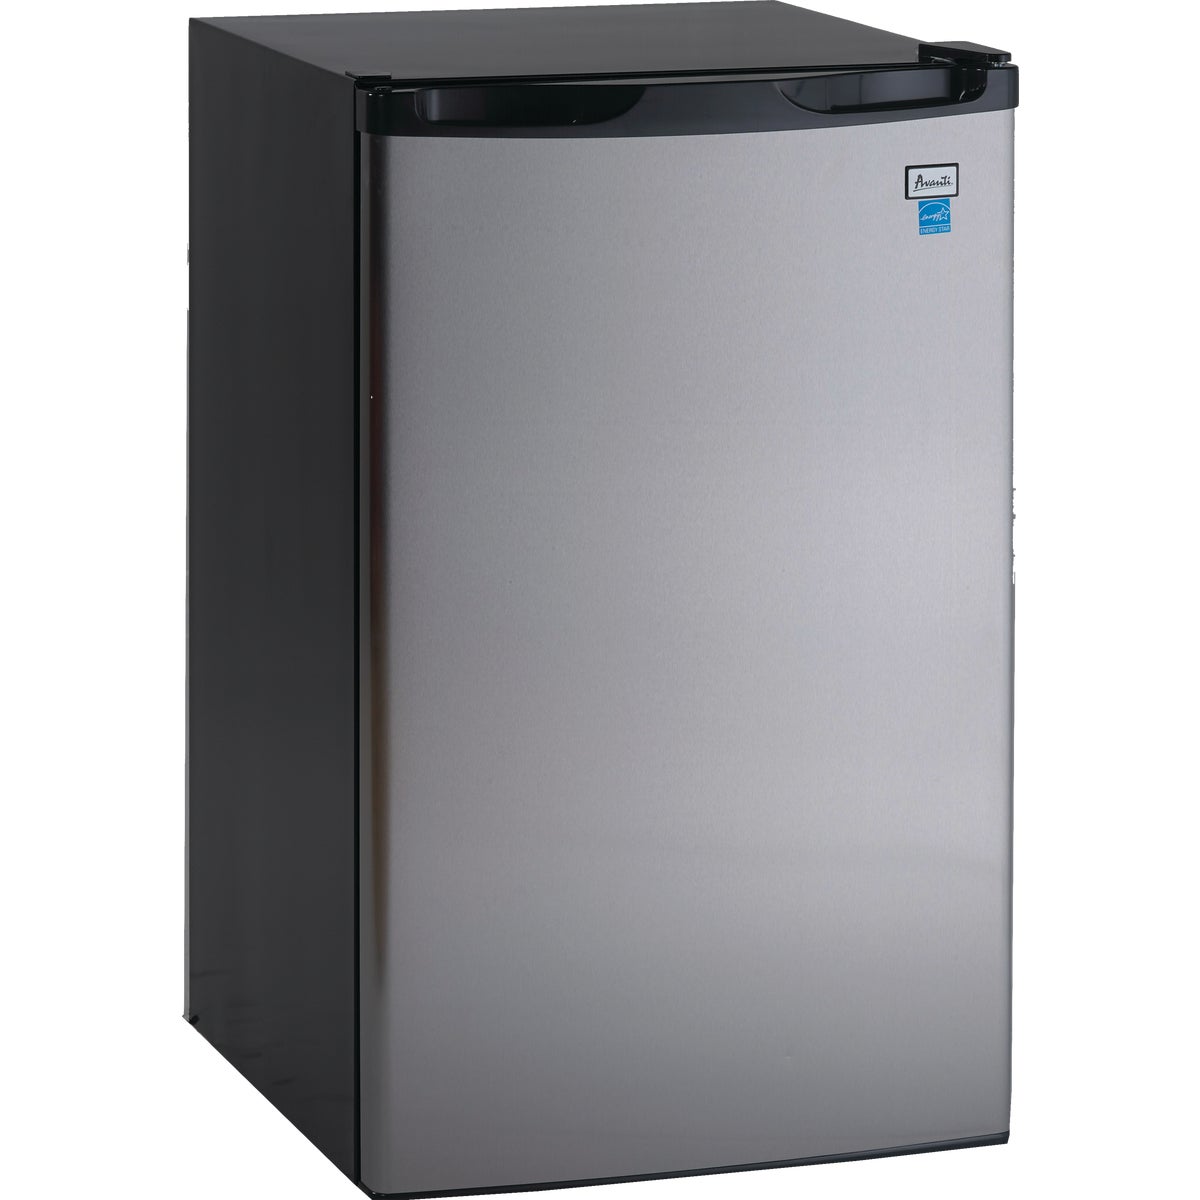 Avanti 4.4 Cu. Ft. Stainless Steel Counter High Door Refrigerator with Separate Chiller